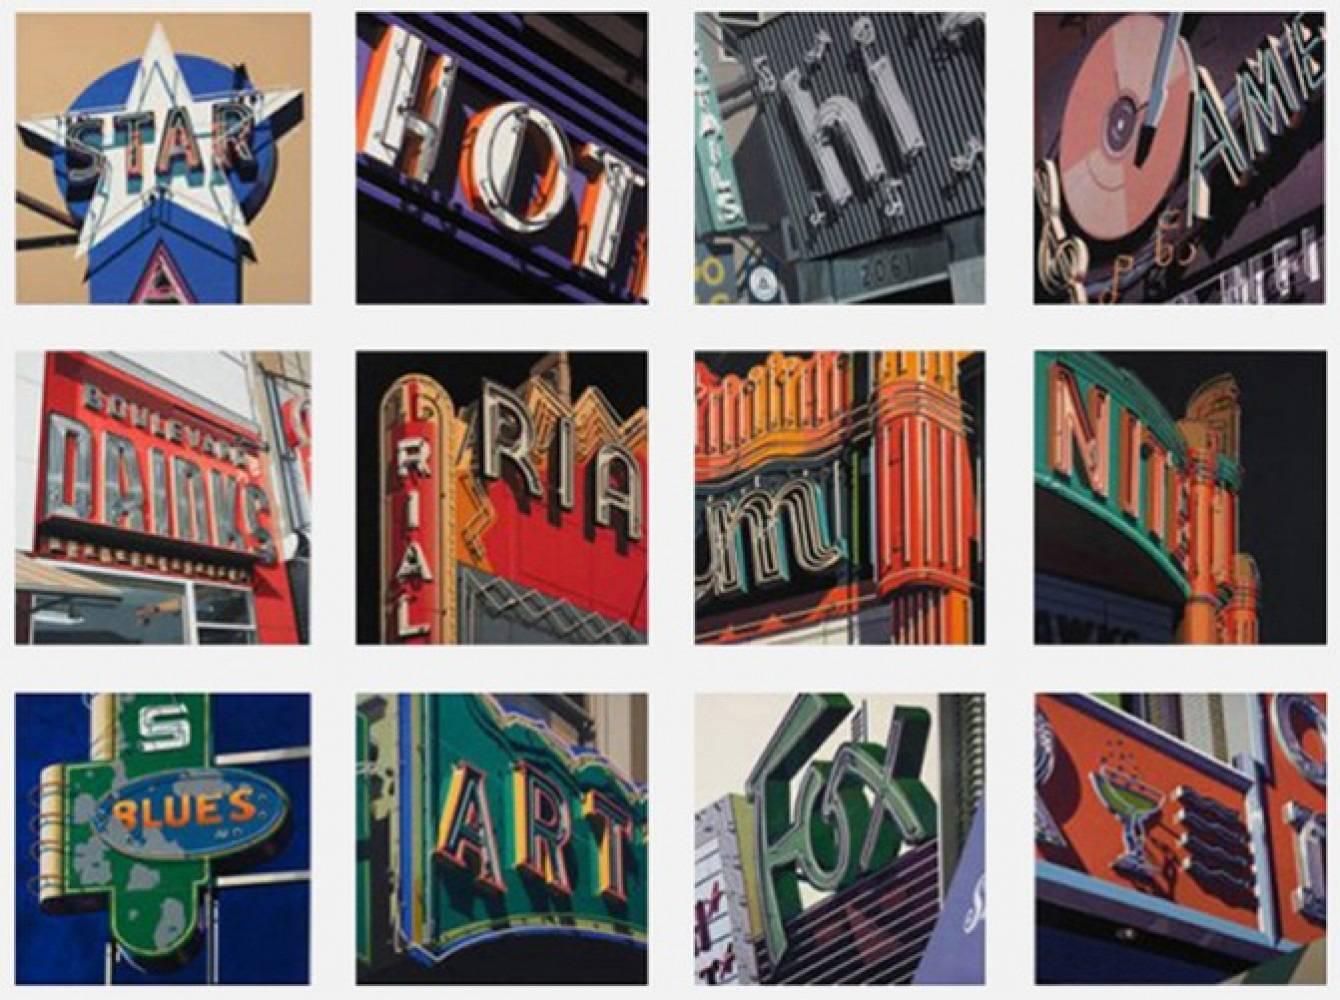 ROBERT COTTINGHAM 
Hot, from American Signs Portfolio, 2009
screenprint in colors, on wove paper, with full margins
40 1/8 x 39 1/8 in (101.9 x 99.4 cm) 
signed, dated `2009' and numbered edition of 100 in pencil

--

Robert Cottingham
B.